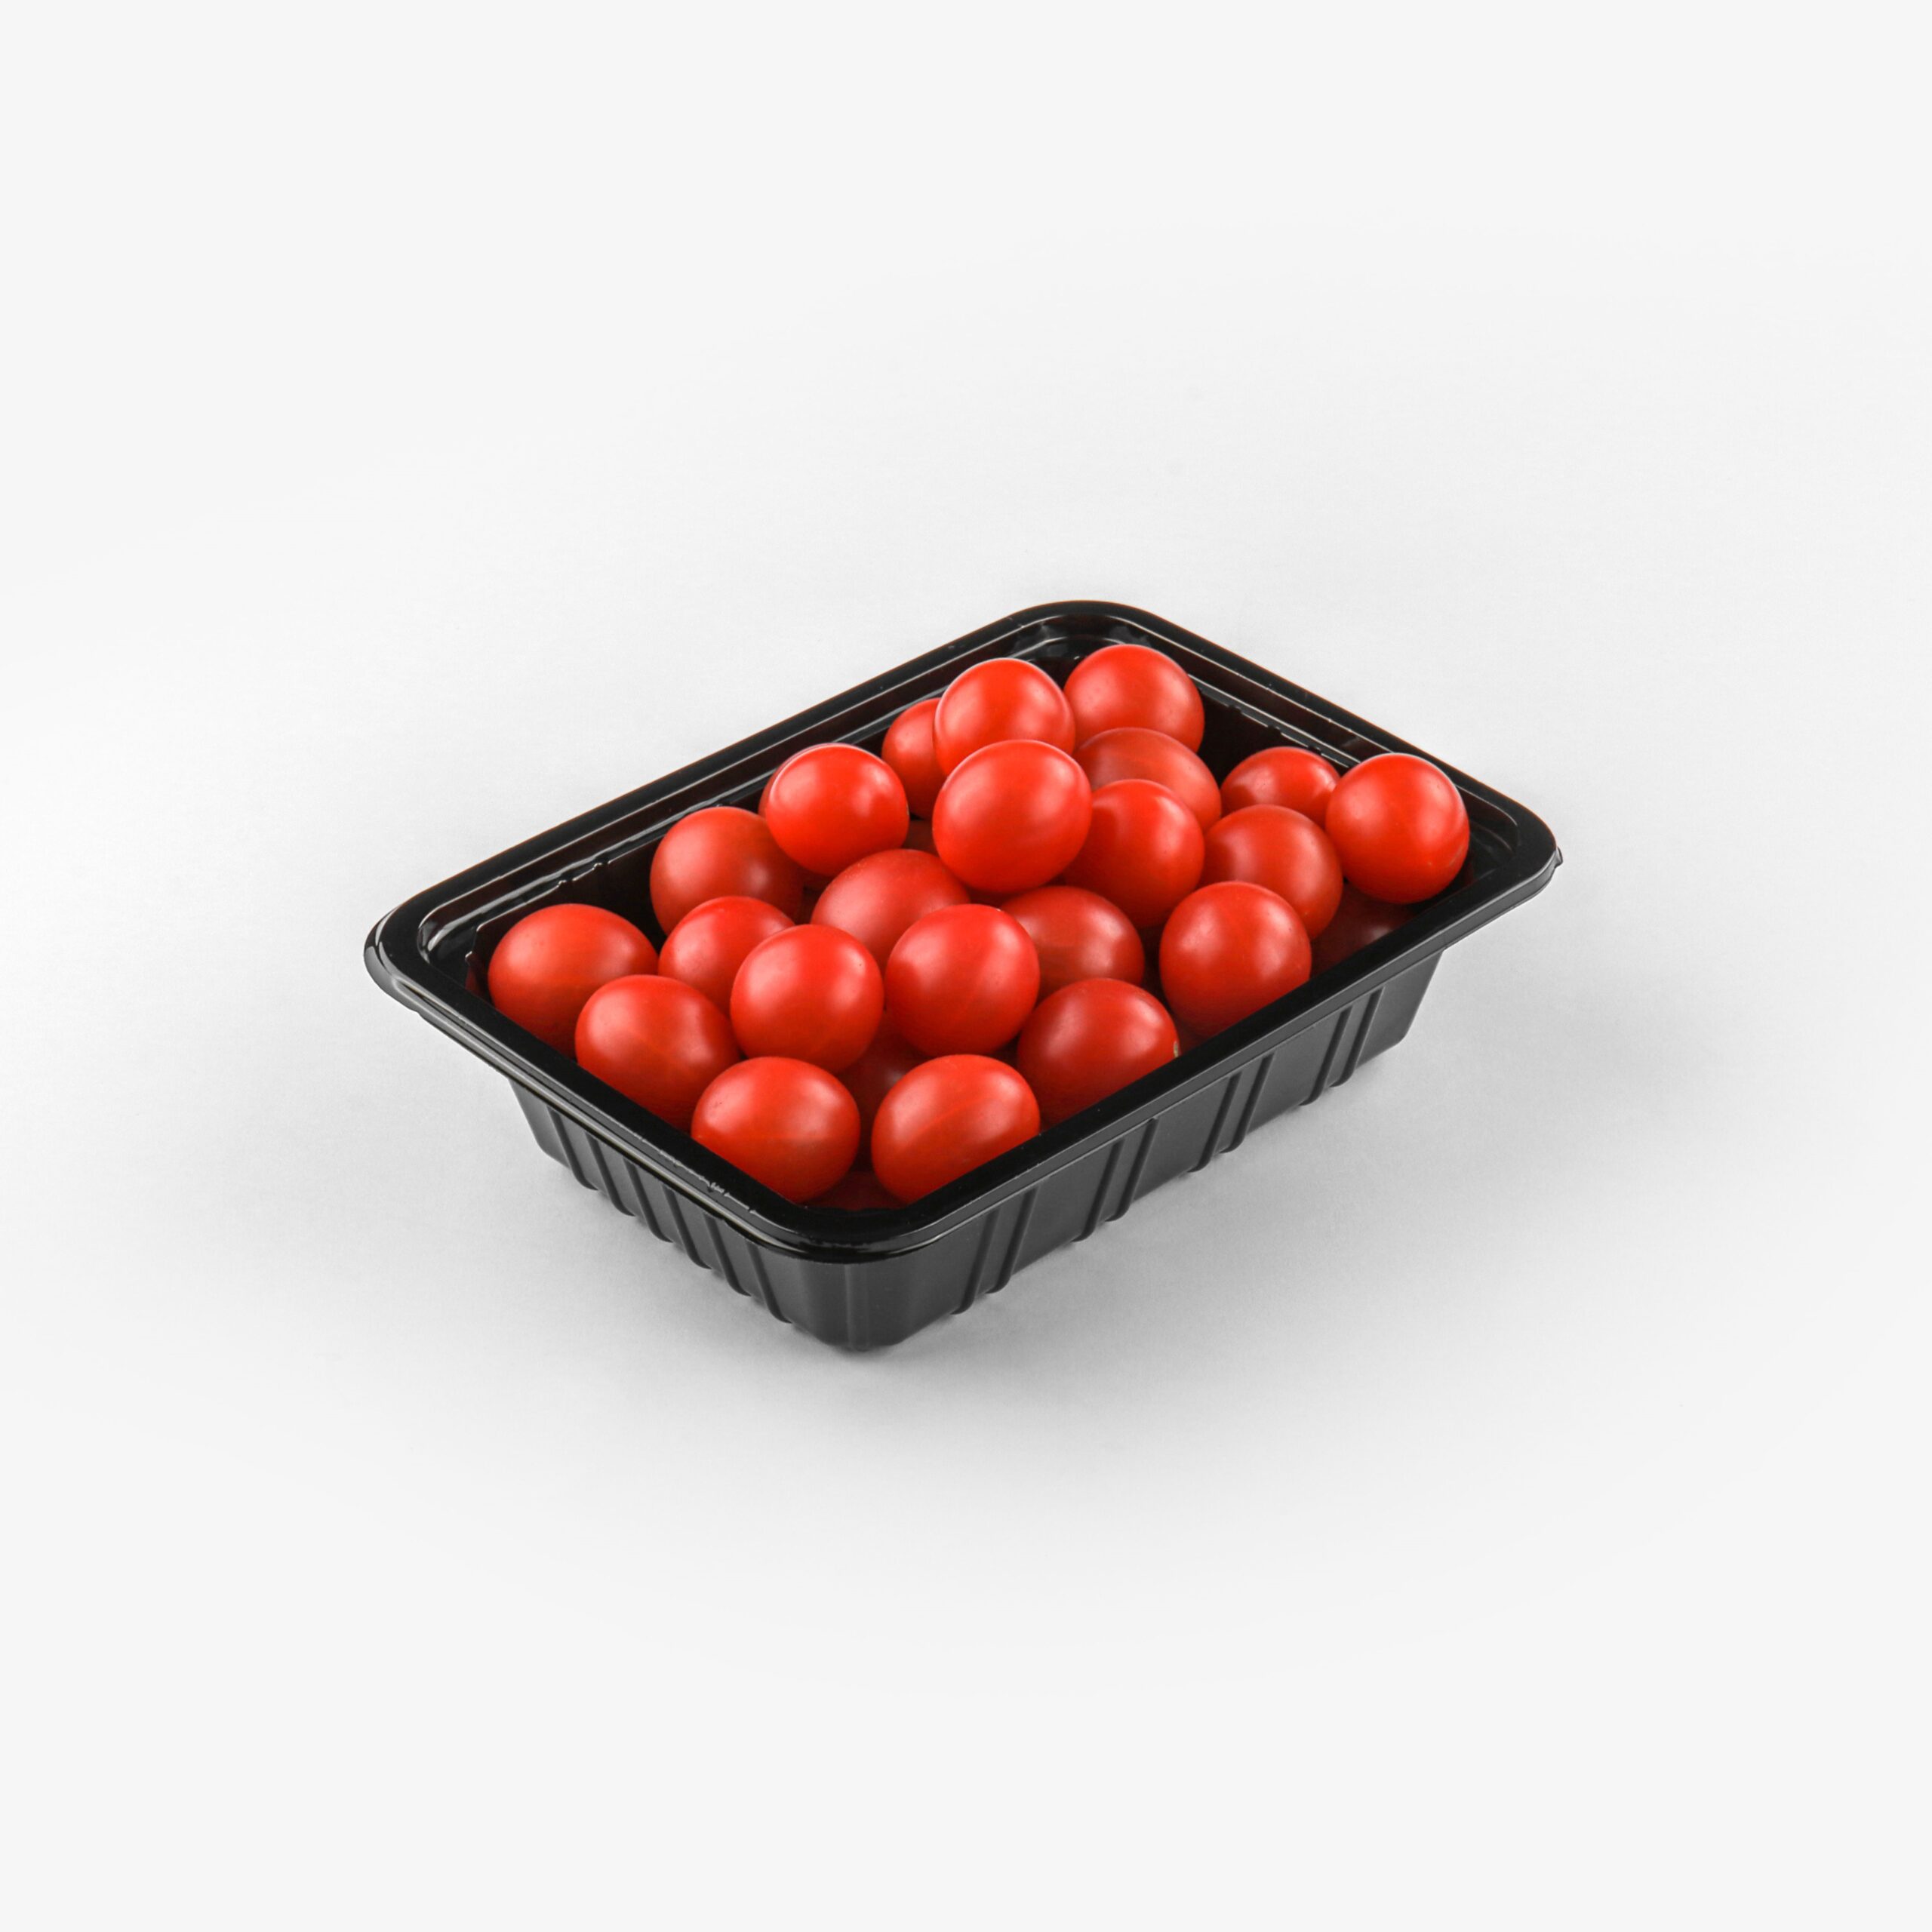 vegetable packing tray 1813h4